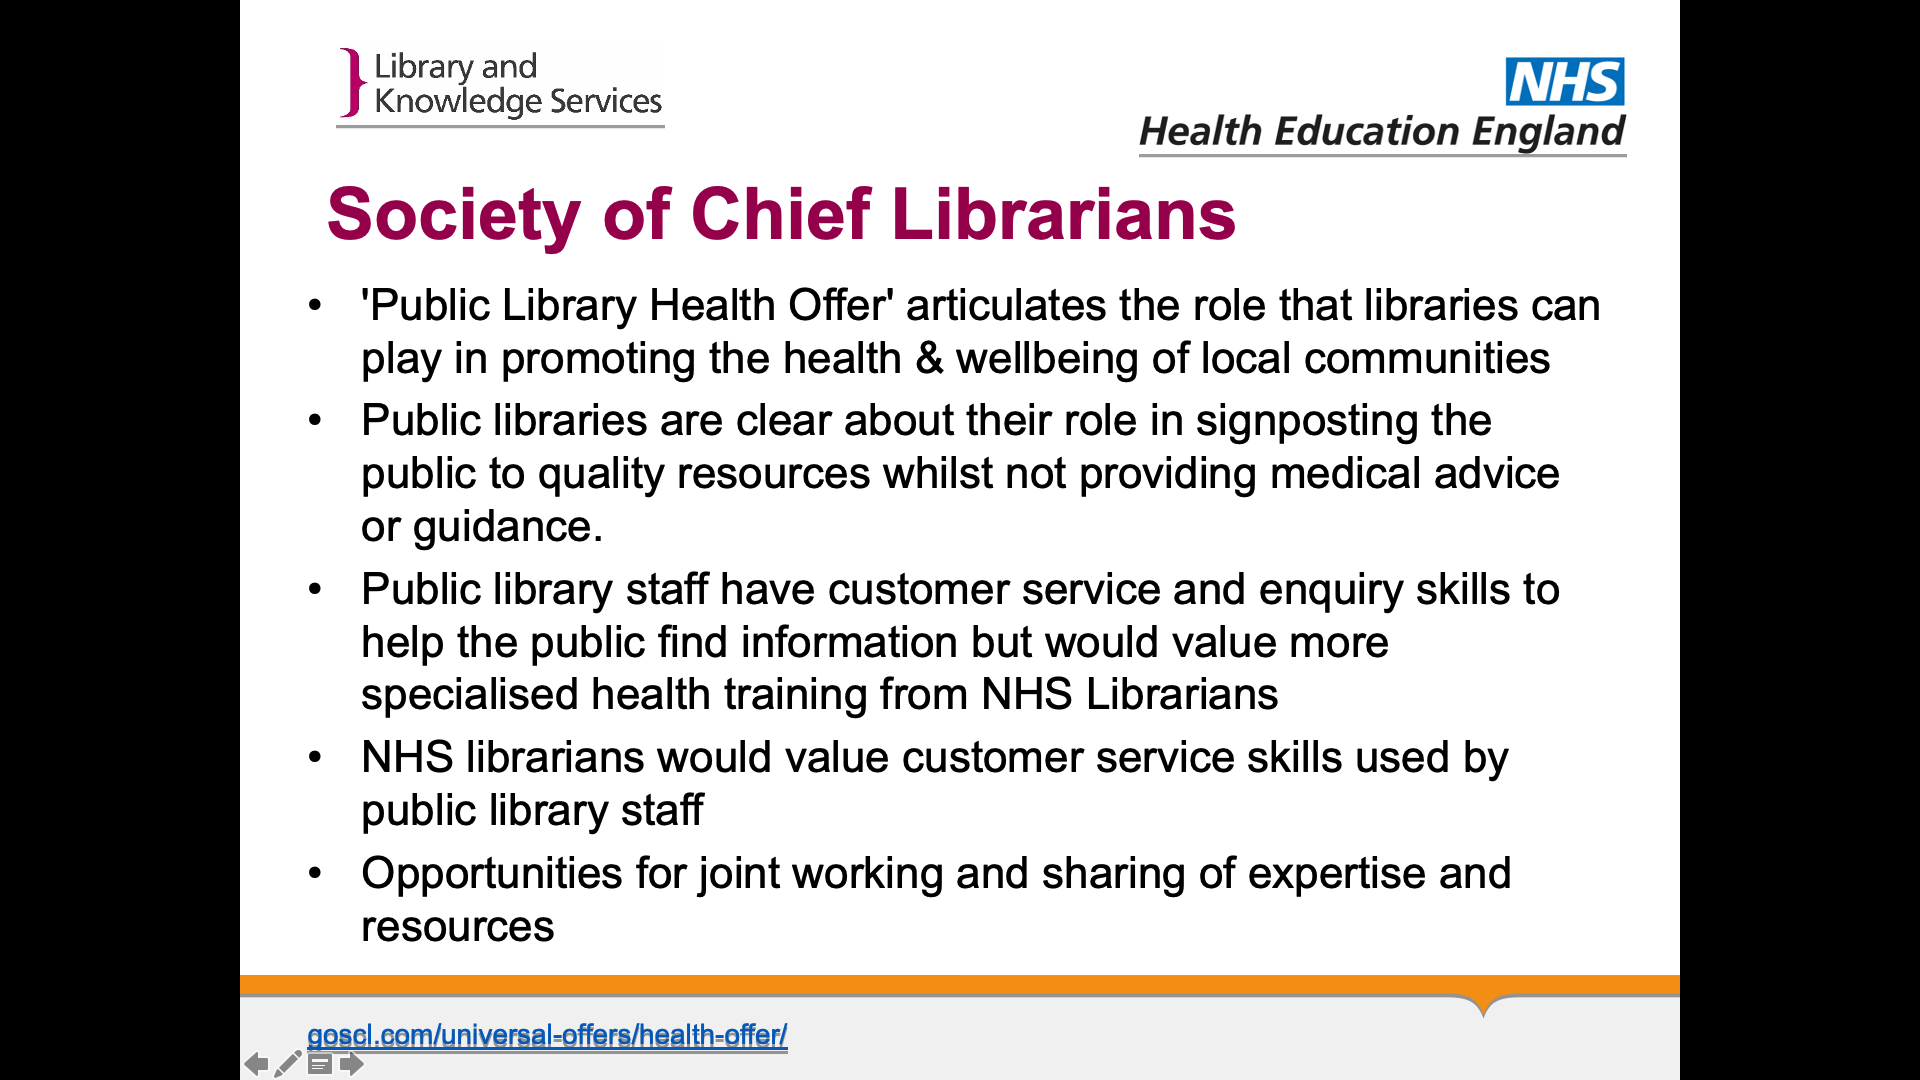 Title: Society of Chief Librarians. Text on page: 1. 'Public Library Health Offer' articulates the role that libraries can play in promoting the health & wellbeing of local communities 2. Public libraries are clear about their role in signposting the public to quality resources whilst not providing medical advice or guidance. 3. Public library staff have customer service and enquiry skills to help the public find information but would value more specialised health training from NHS Librarians 4. NHS librarians would value customer service skills used by public library staff. 5. Opportunities for joint working and sharing of expertise and resources